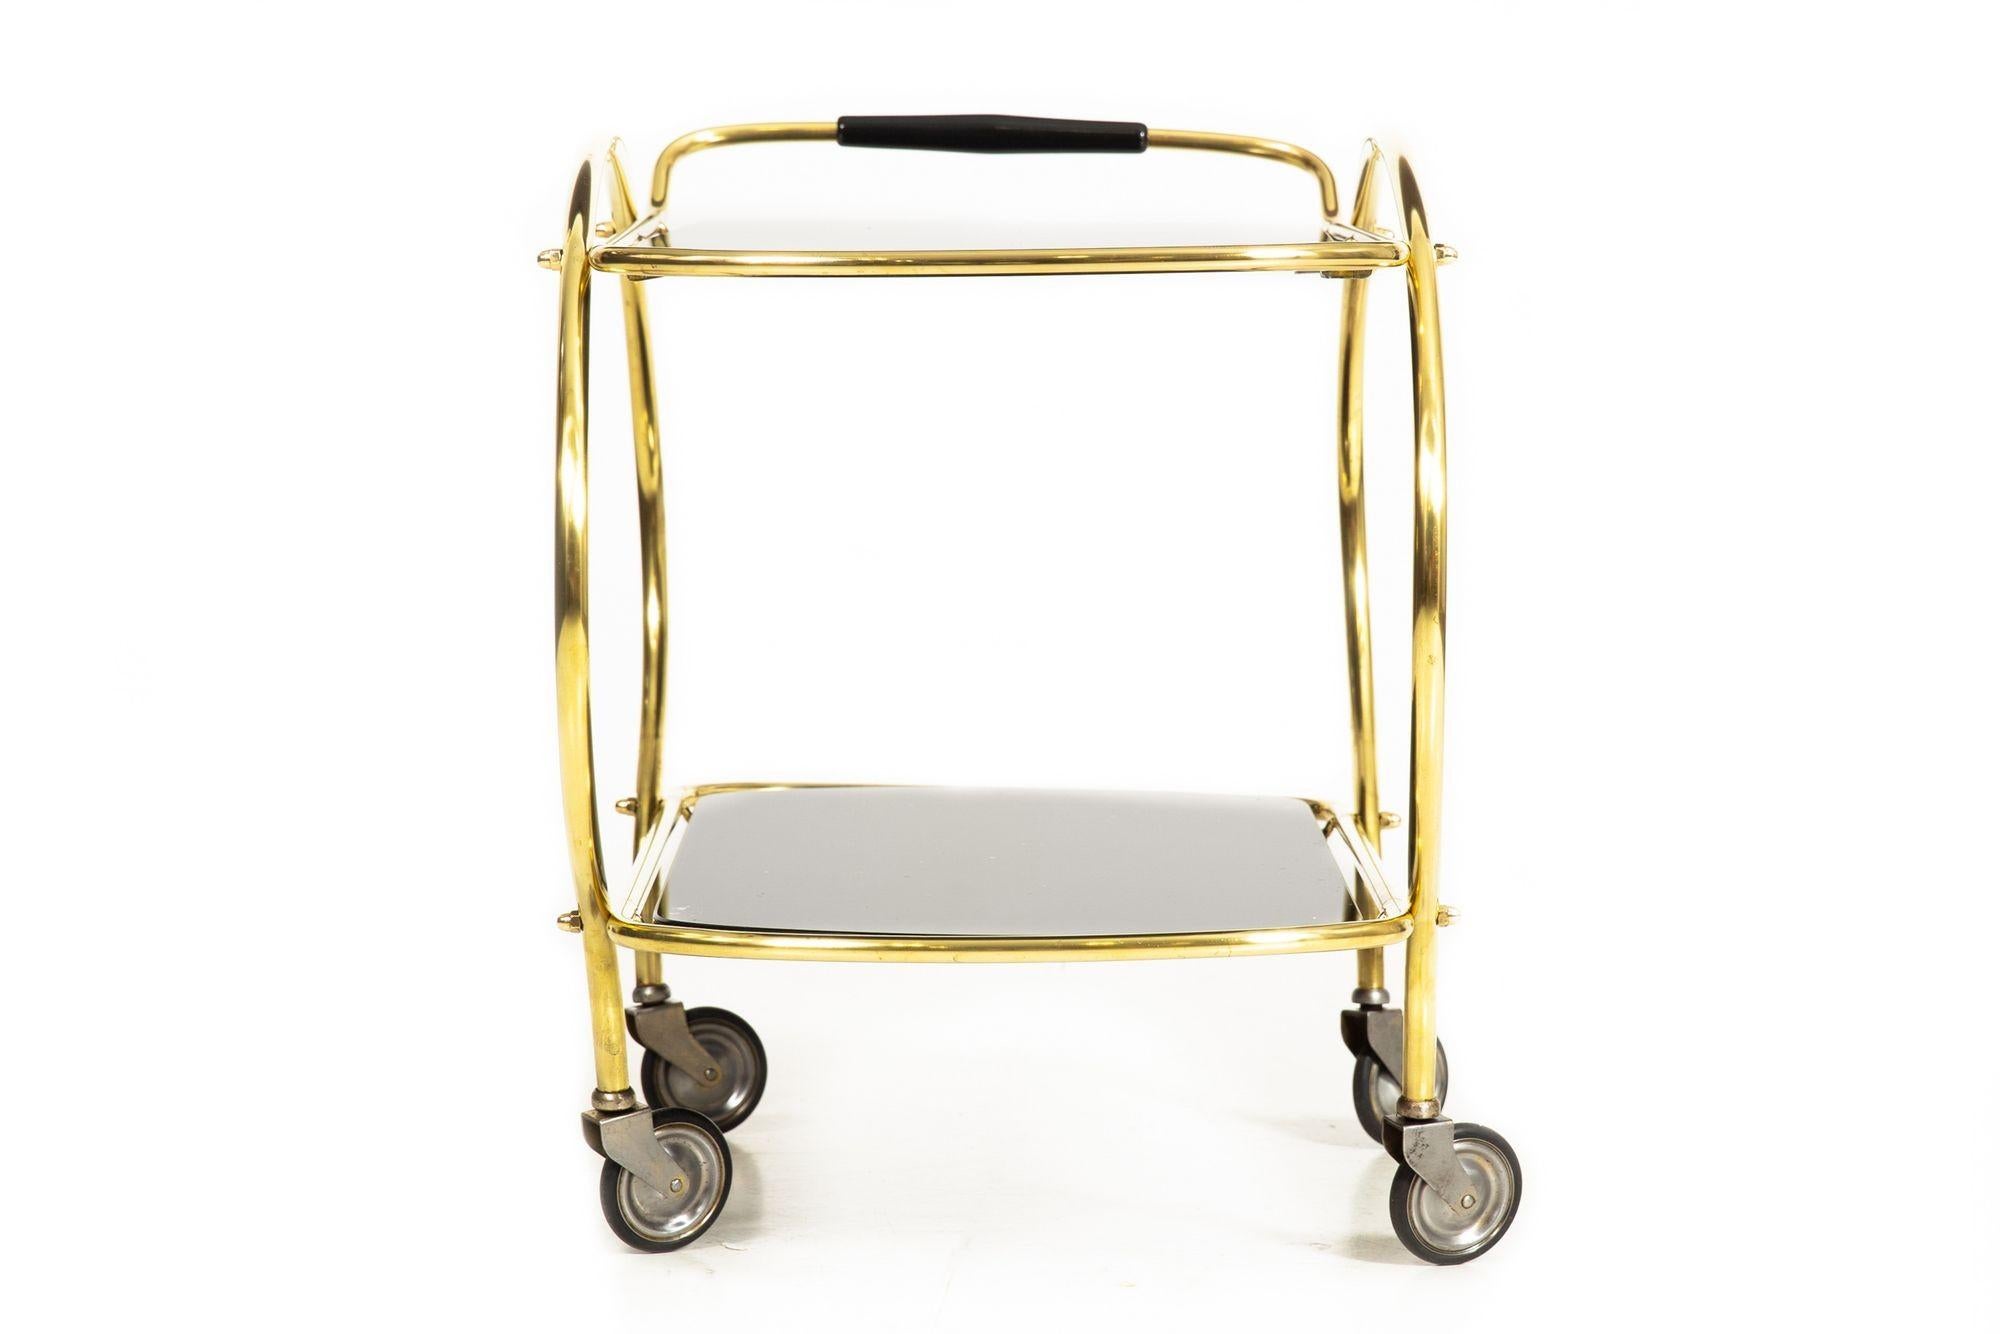 American Mid-Century Brass and Black Glass Two-Tier Serving Bar Cart ca. 1950s For Sale